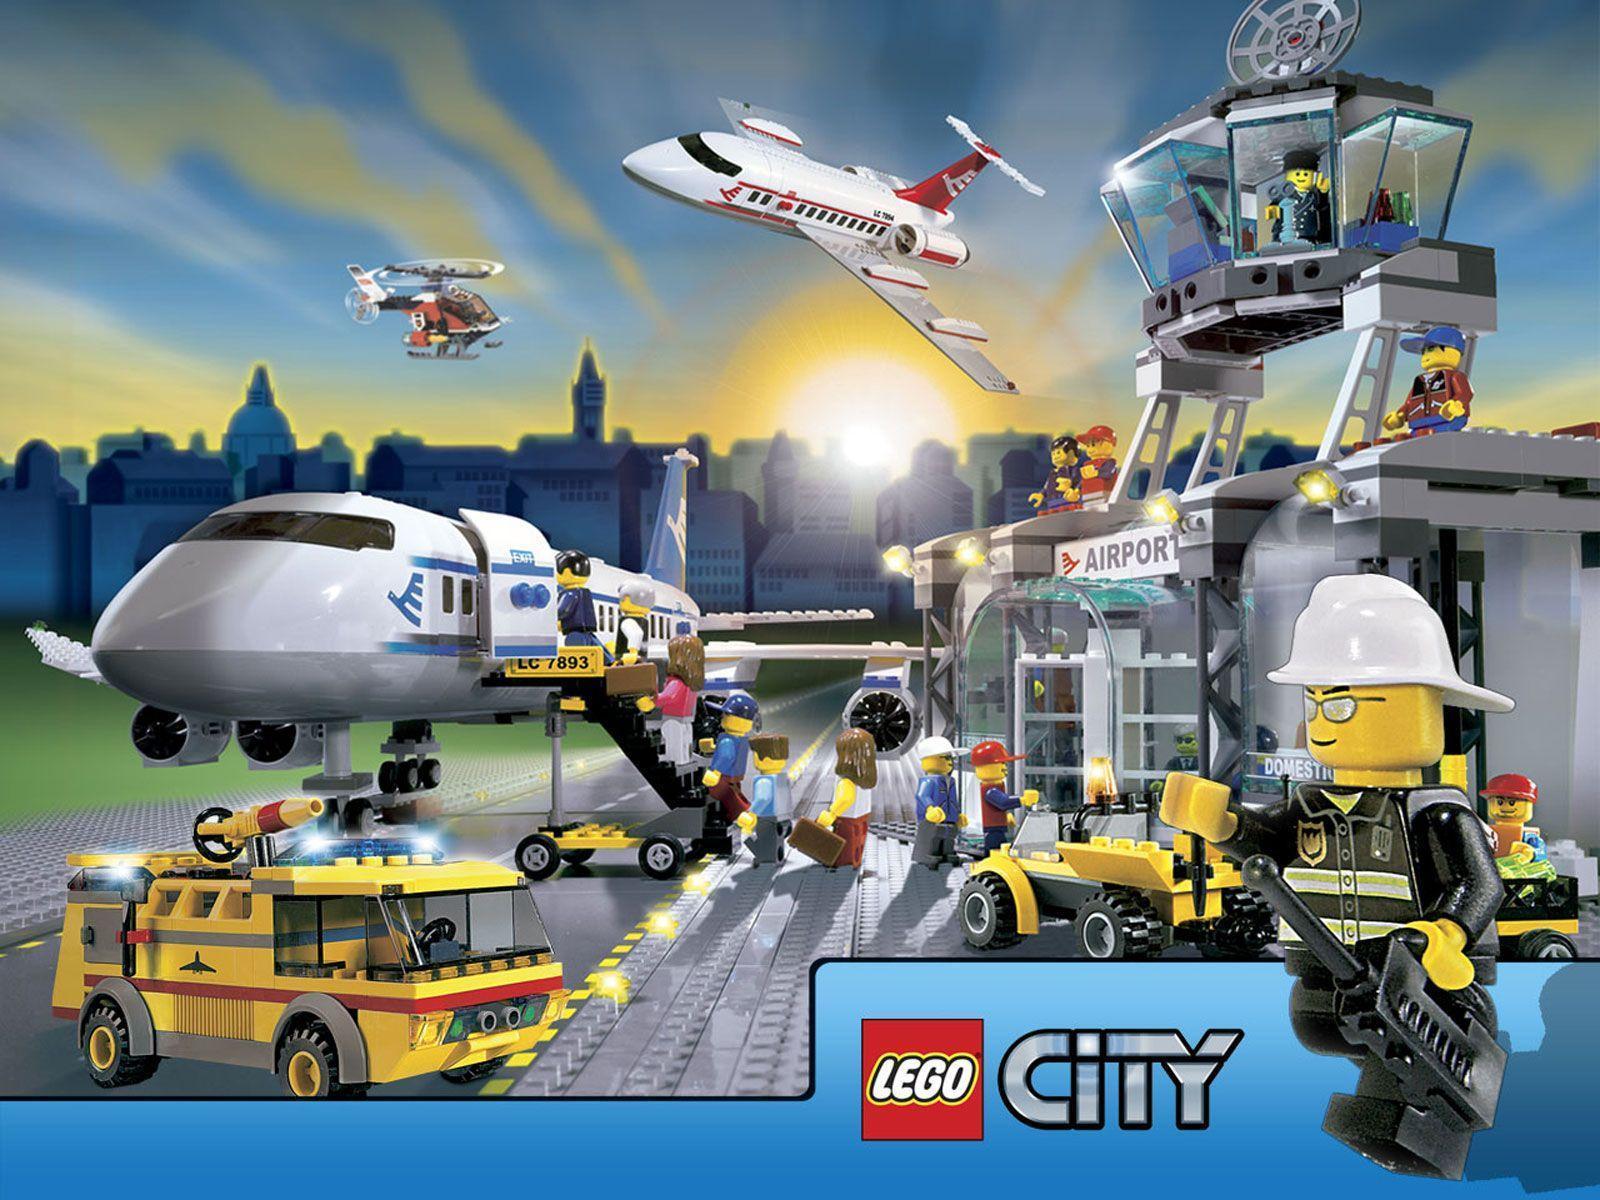 Lego City Wallpaper. Things to Wear. Lego, Image